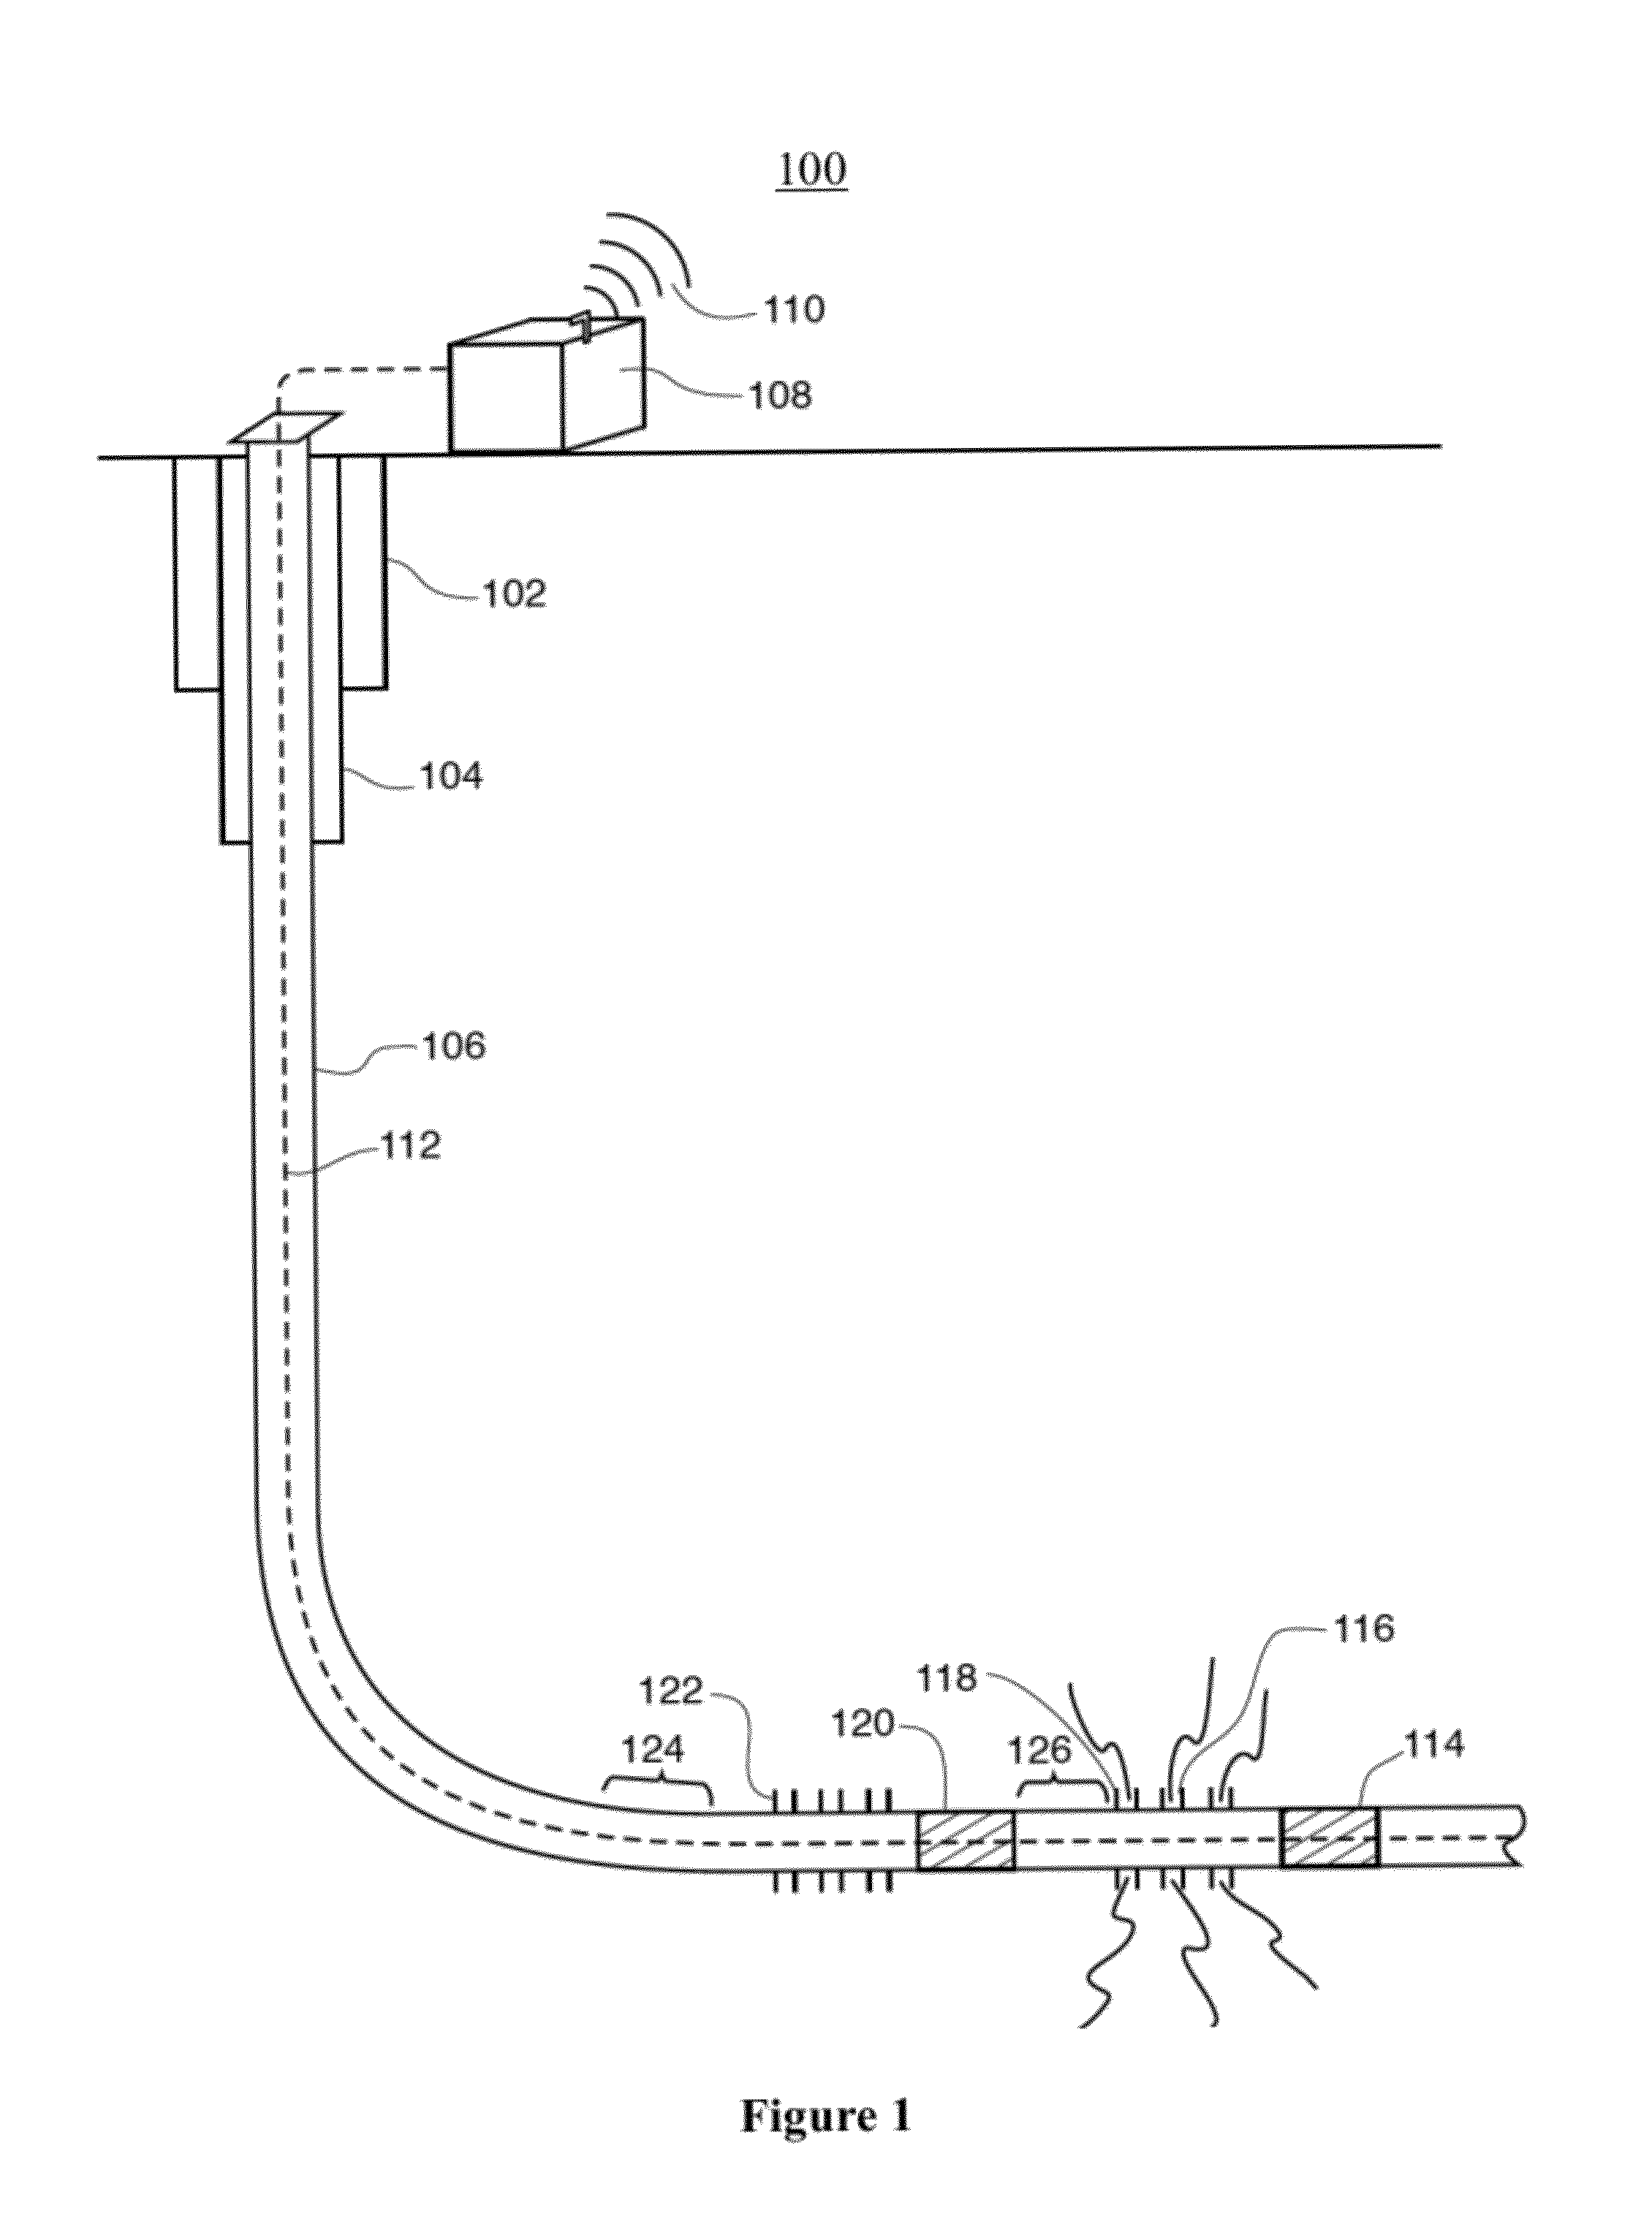 Systems and methods for monitoring groundwater, rock, and casing for production flow and leakage of hydrocarbon fluids